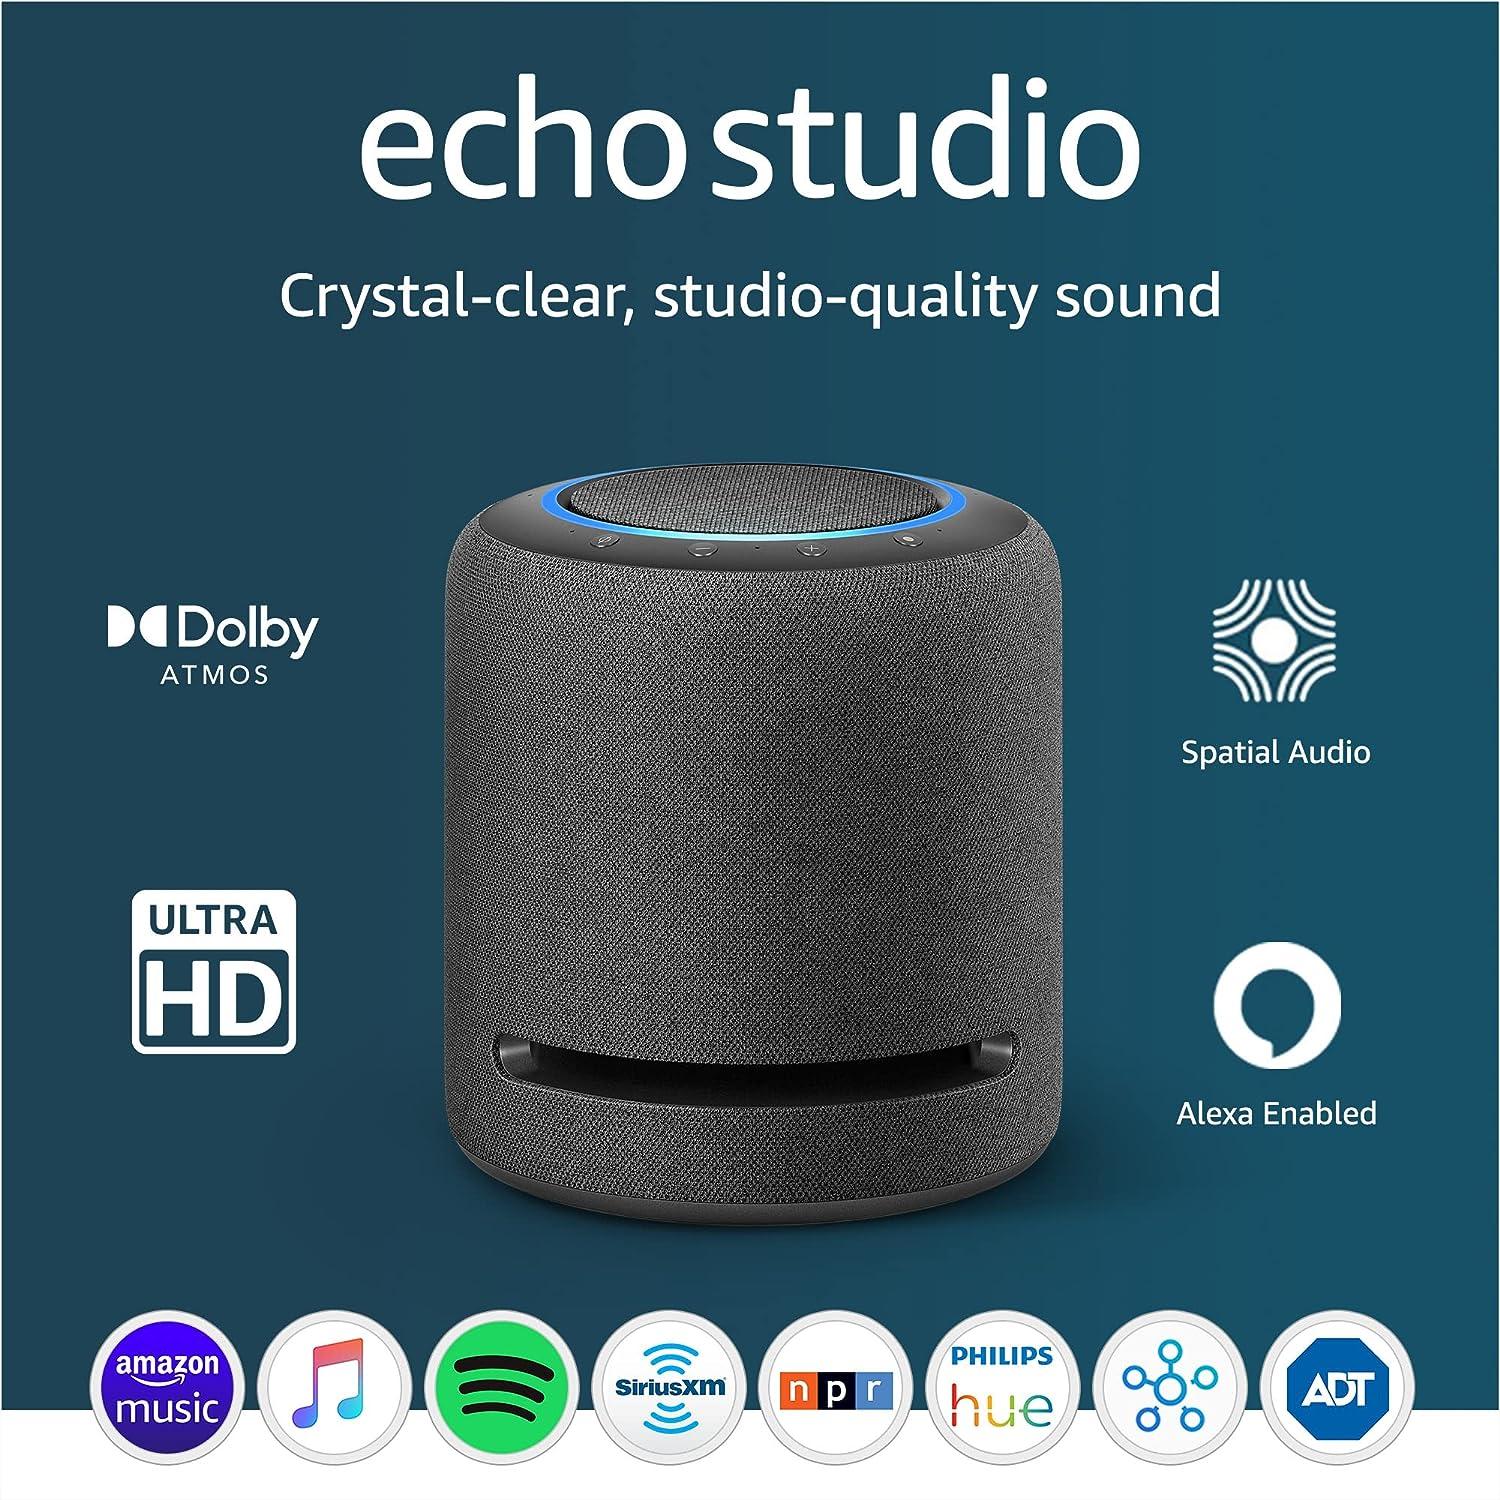 echo studio our best-sounding smart speaker ever - with dolby atmos spatial audio processing technology and